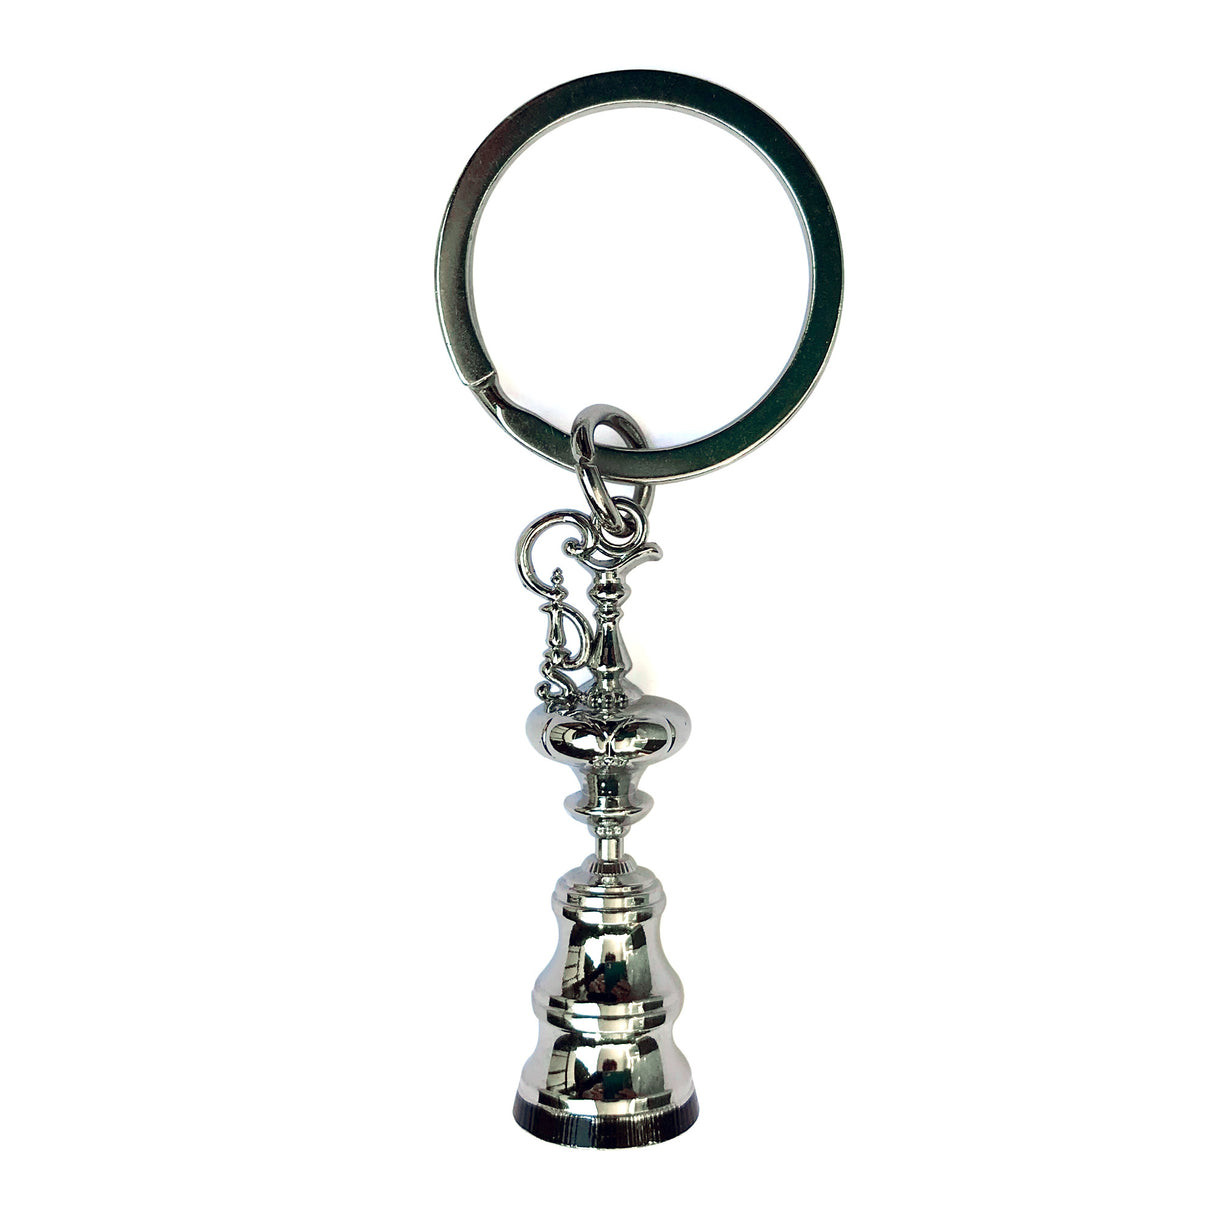 37th America's Cup Keyring